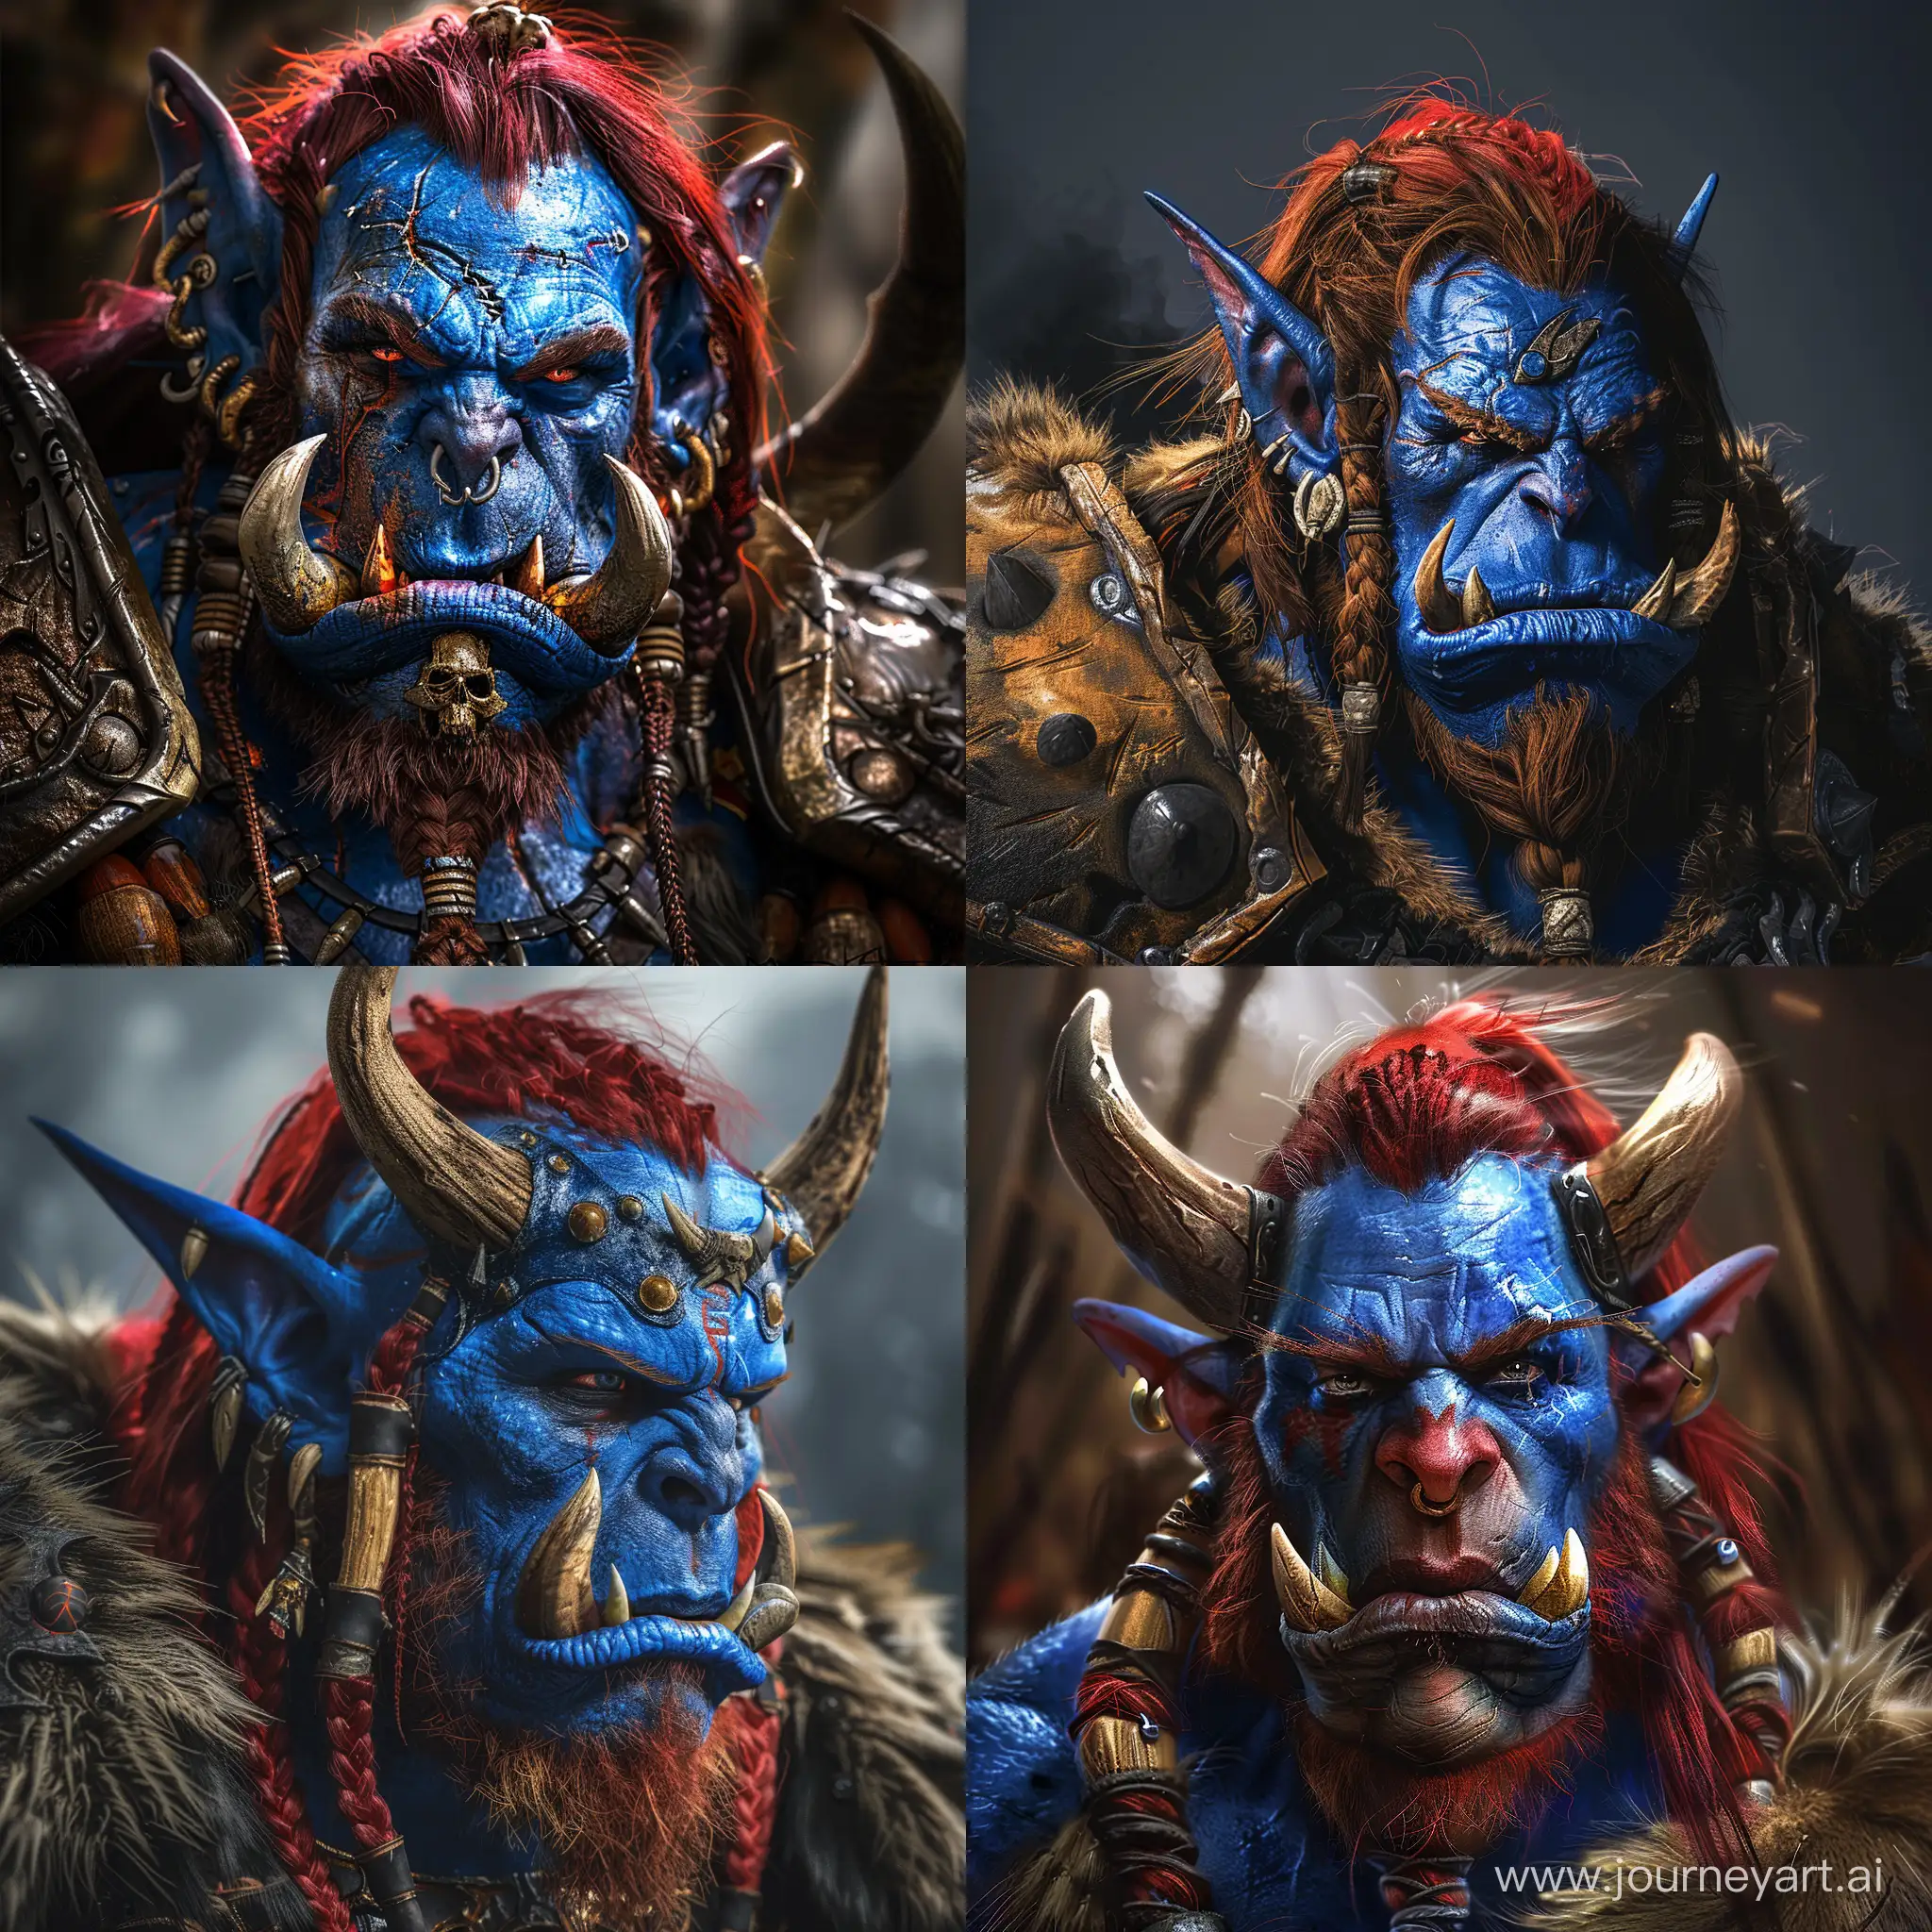 world of warcraft Vol'jin character, art, blue skin, red hair. high-detalized, tusks, portrait photo. The image should be shot in ultra-high resolution, aperture setting to blur the background and isolate the subject. use distinctive lighting on the subjects shot. The image should be shot in ultra-high resolution. --v 6